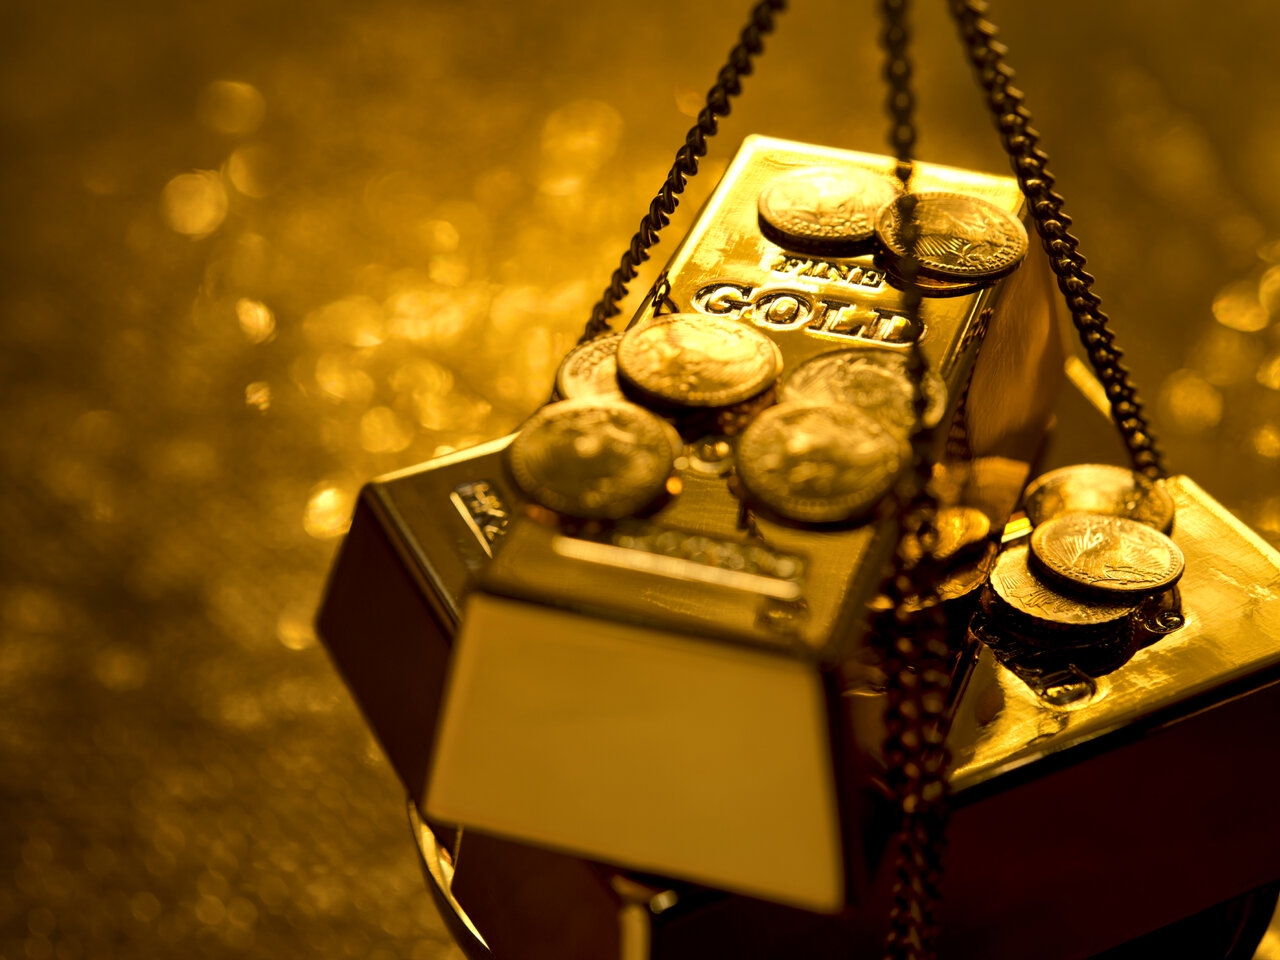 Gold recedes from $1,811 to $1,807.68, currently around $1,808.50, during the early Monday morning in Asia